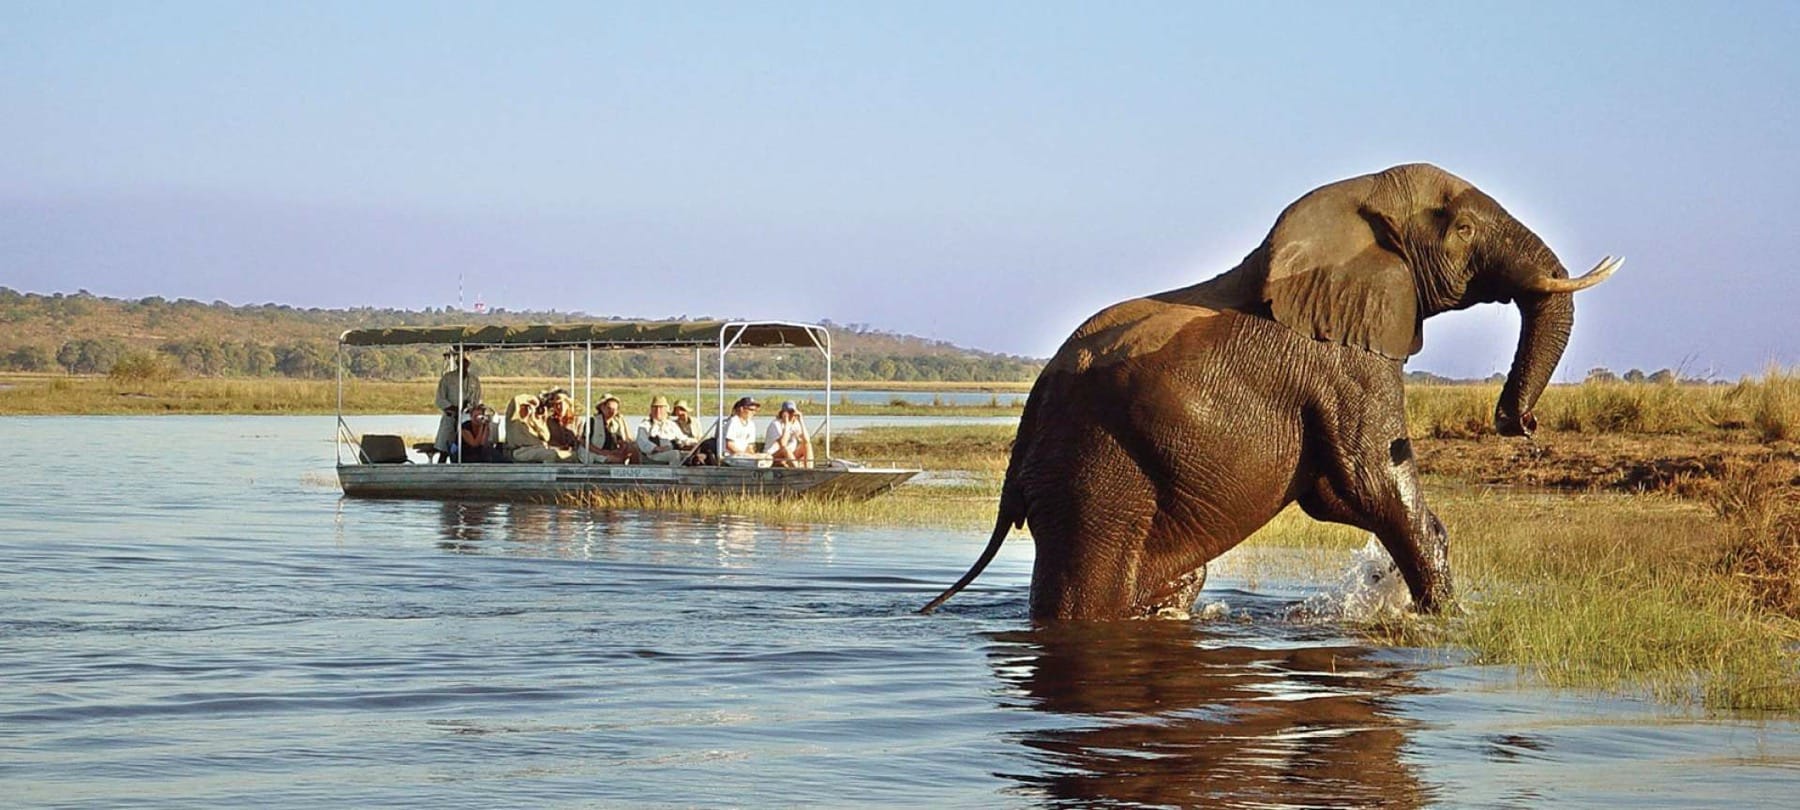 Elephant on the Chobe riverbank are a common sight